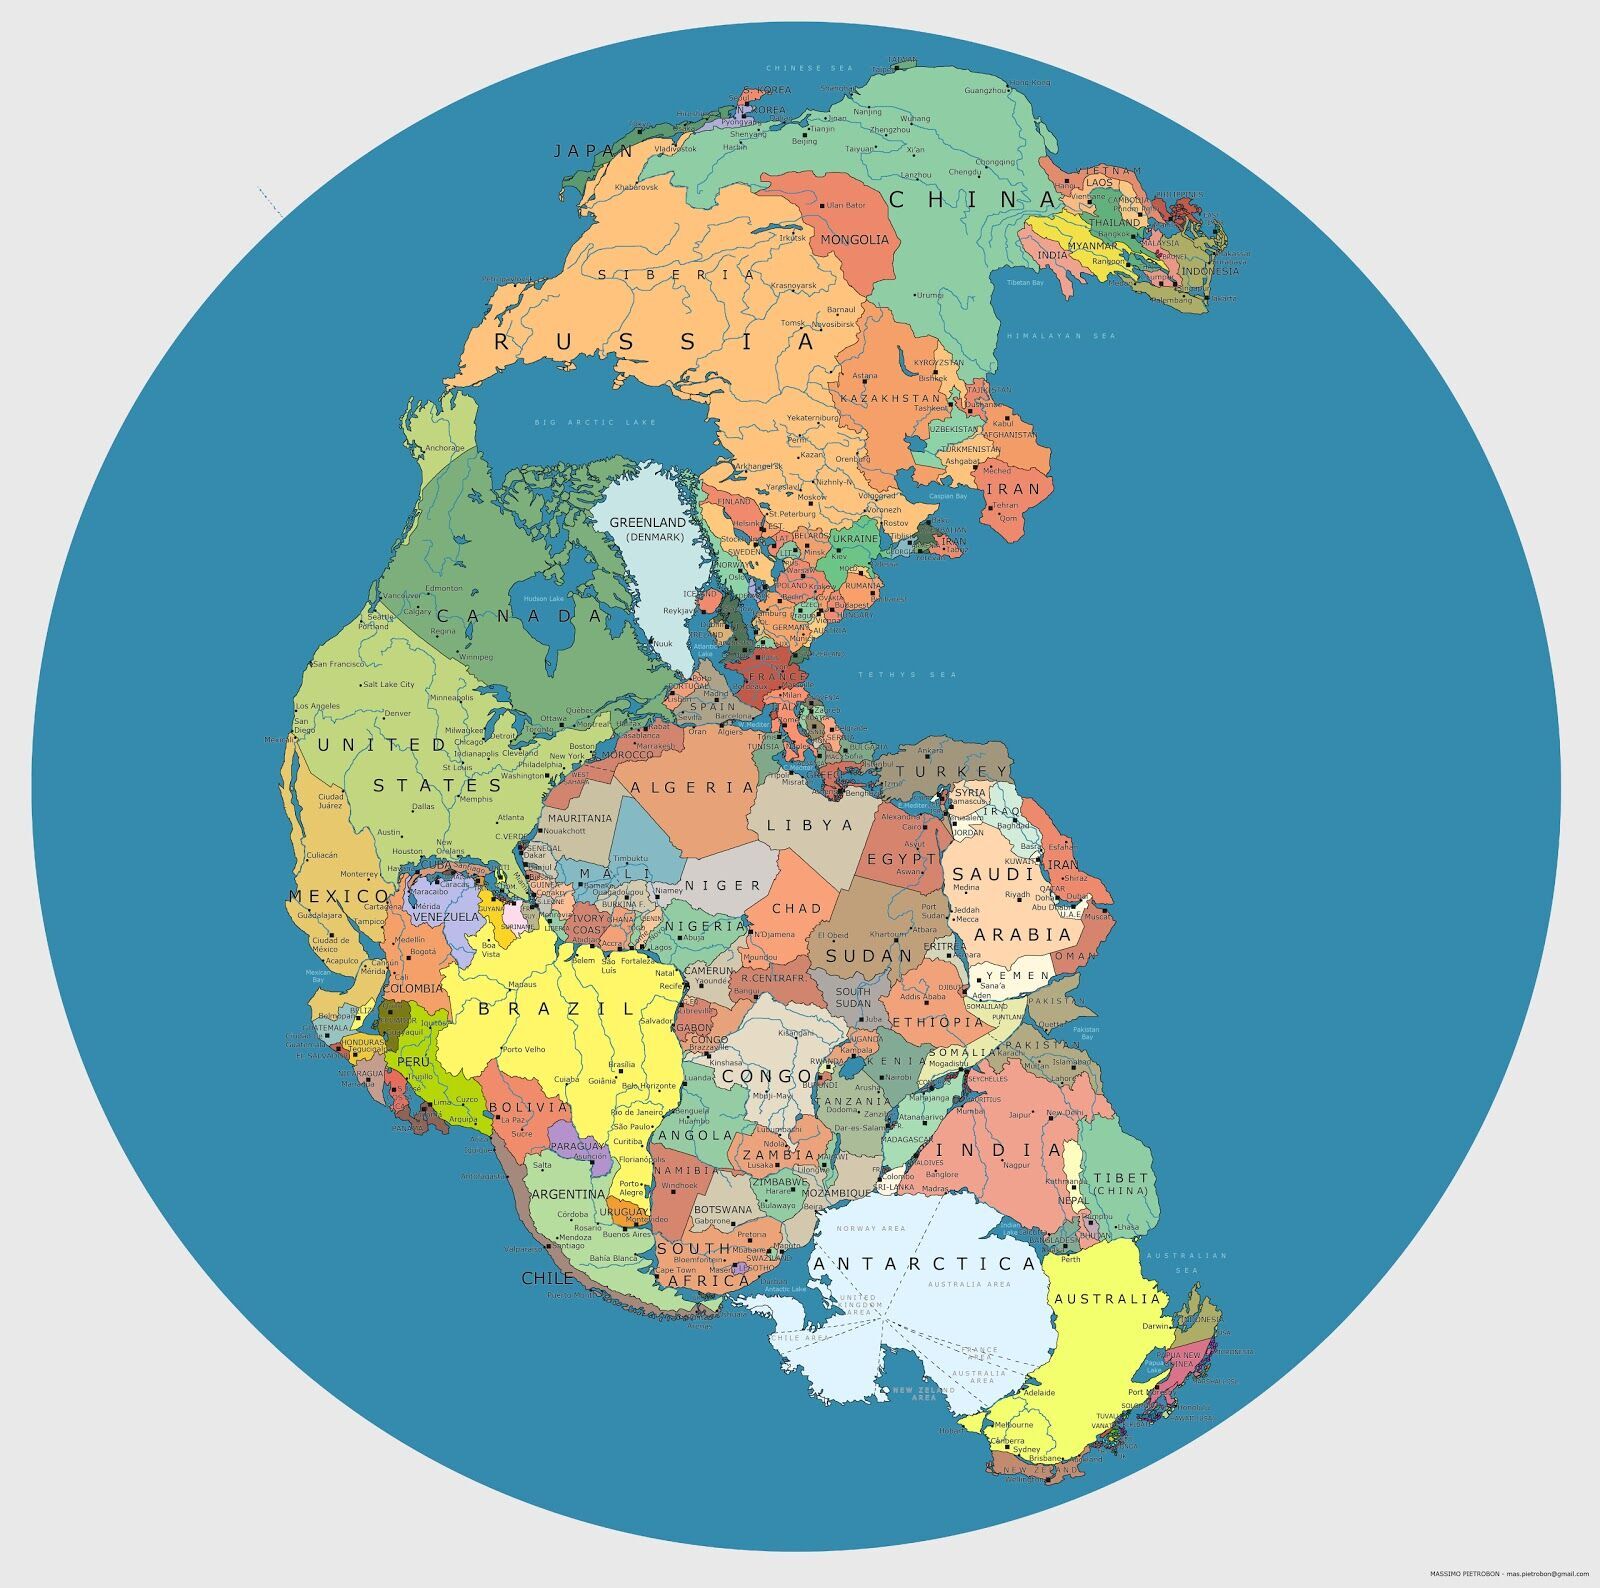 Map of the supercontinent Pangaea